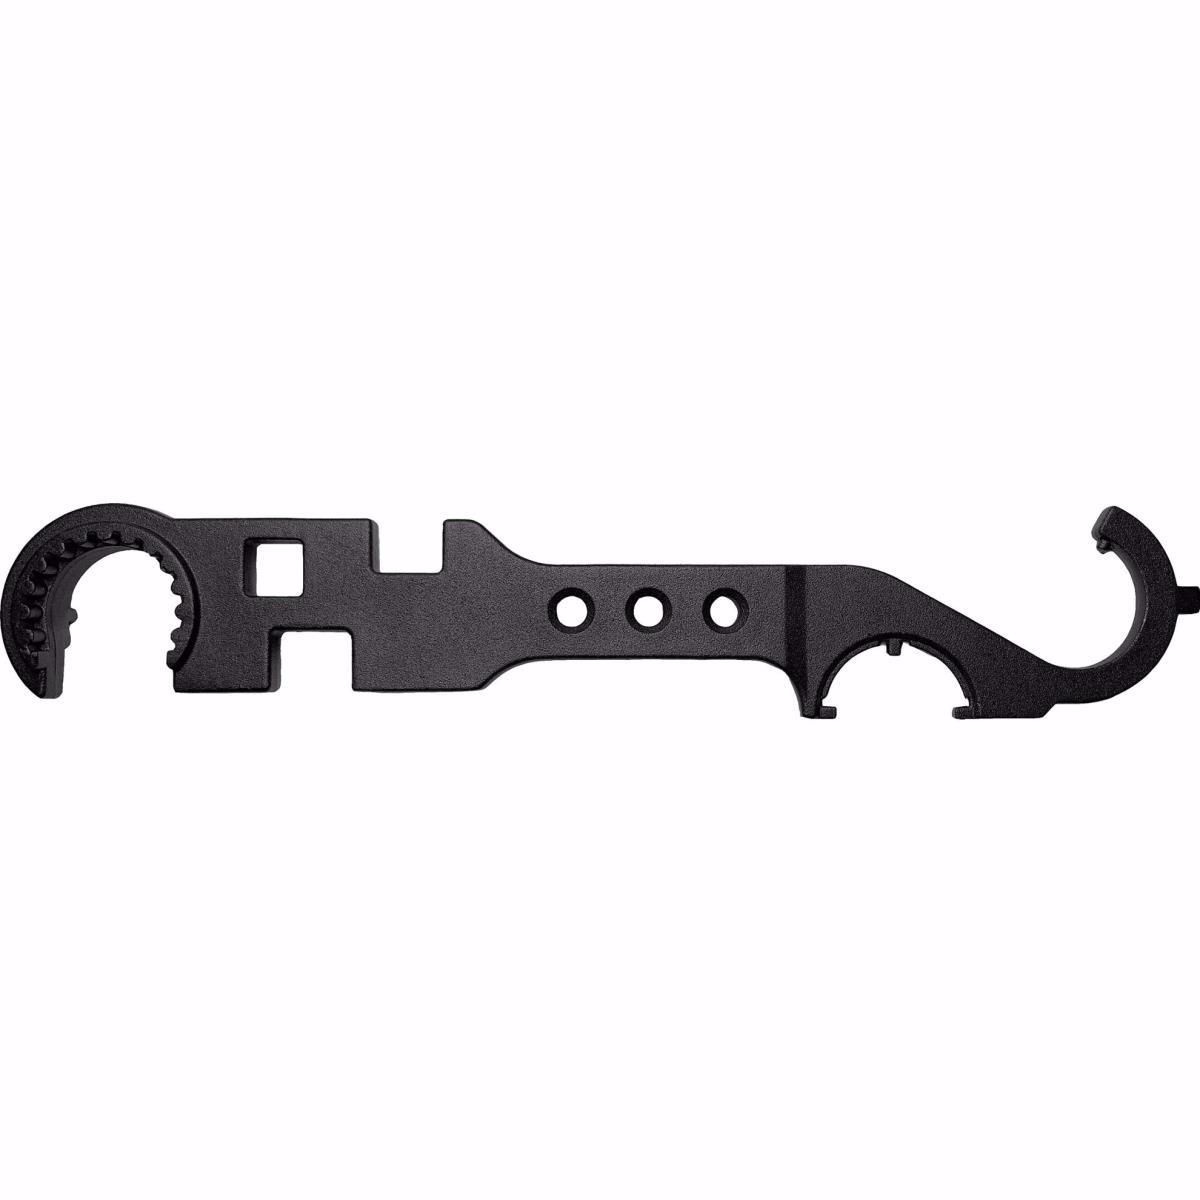 Picture of Barska AW13635 AR-15-M4 Combo Wrench Tool, Black Matte